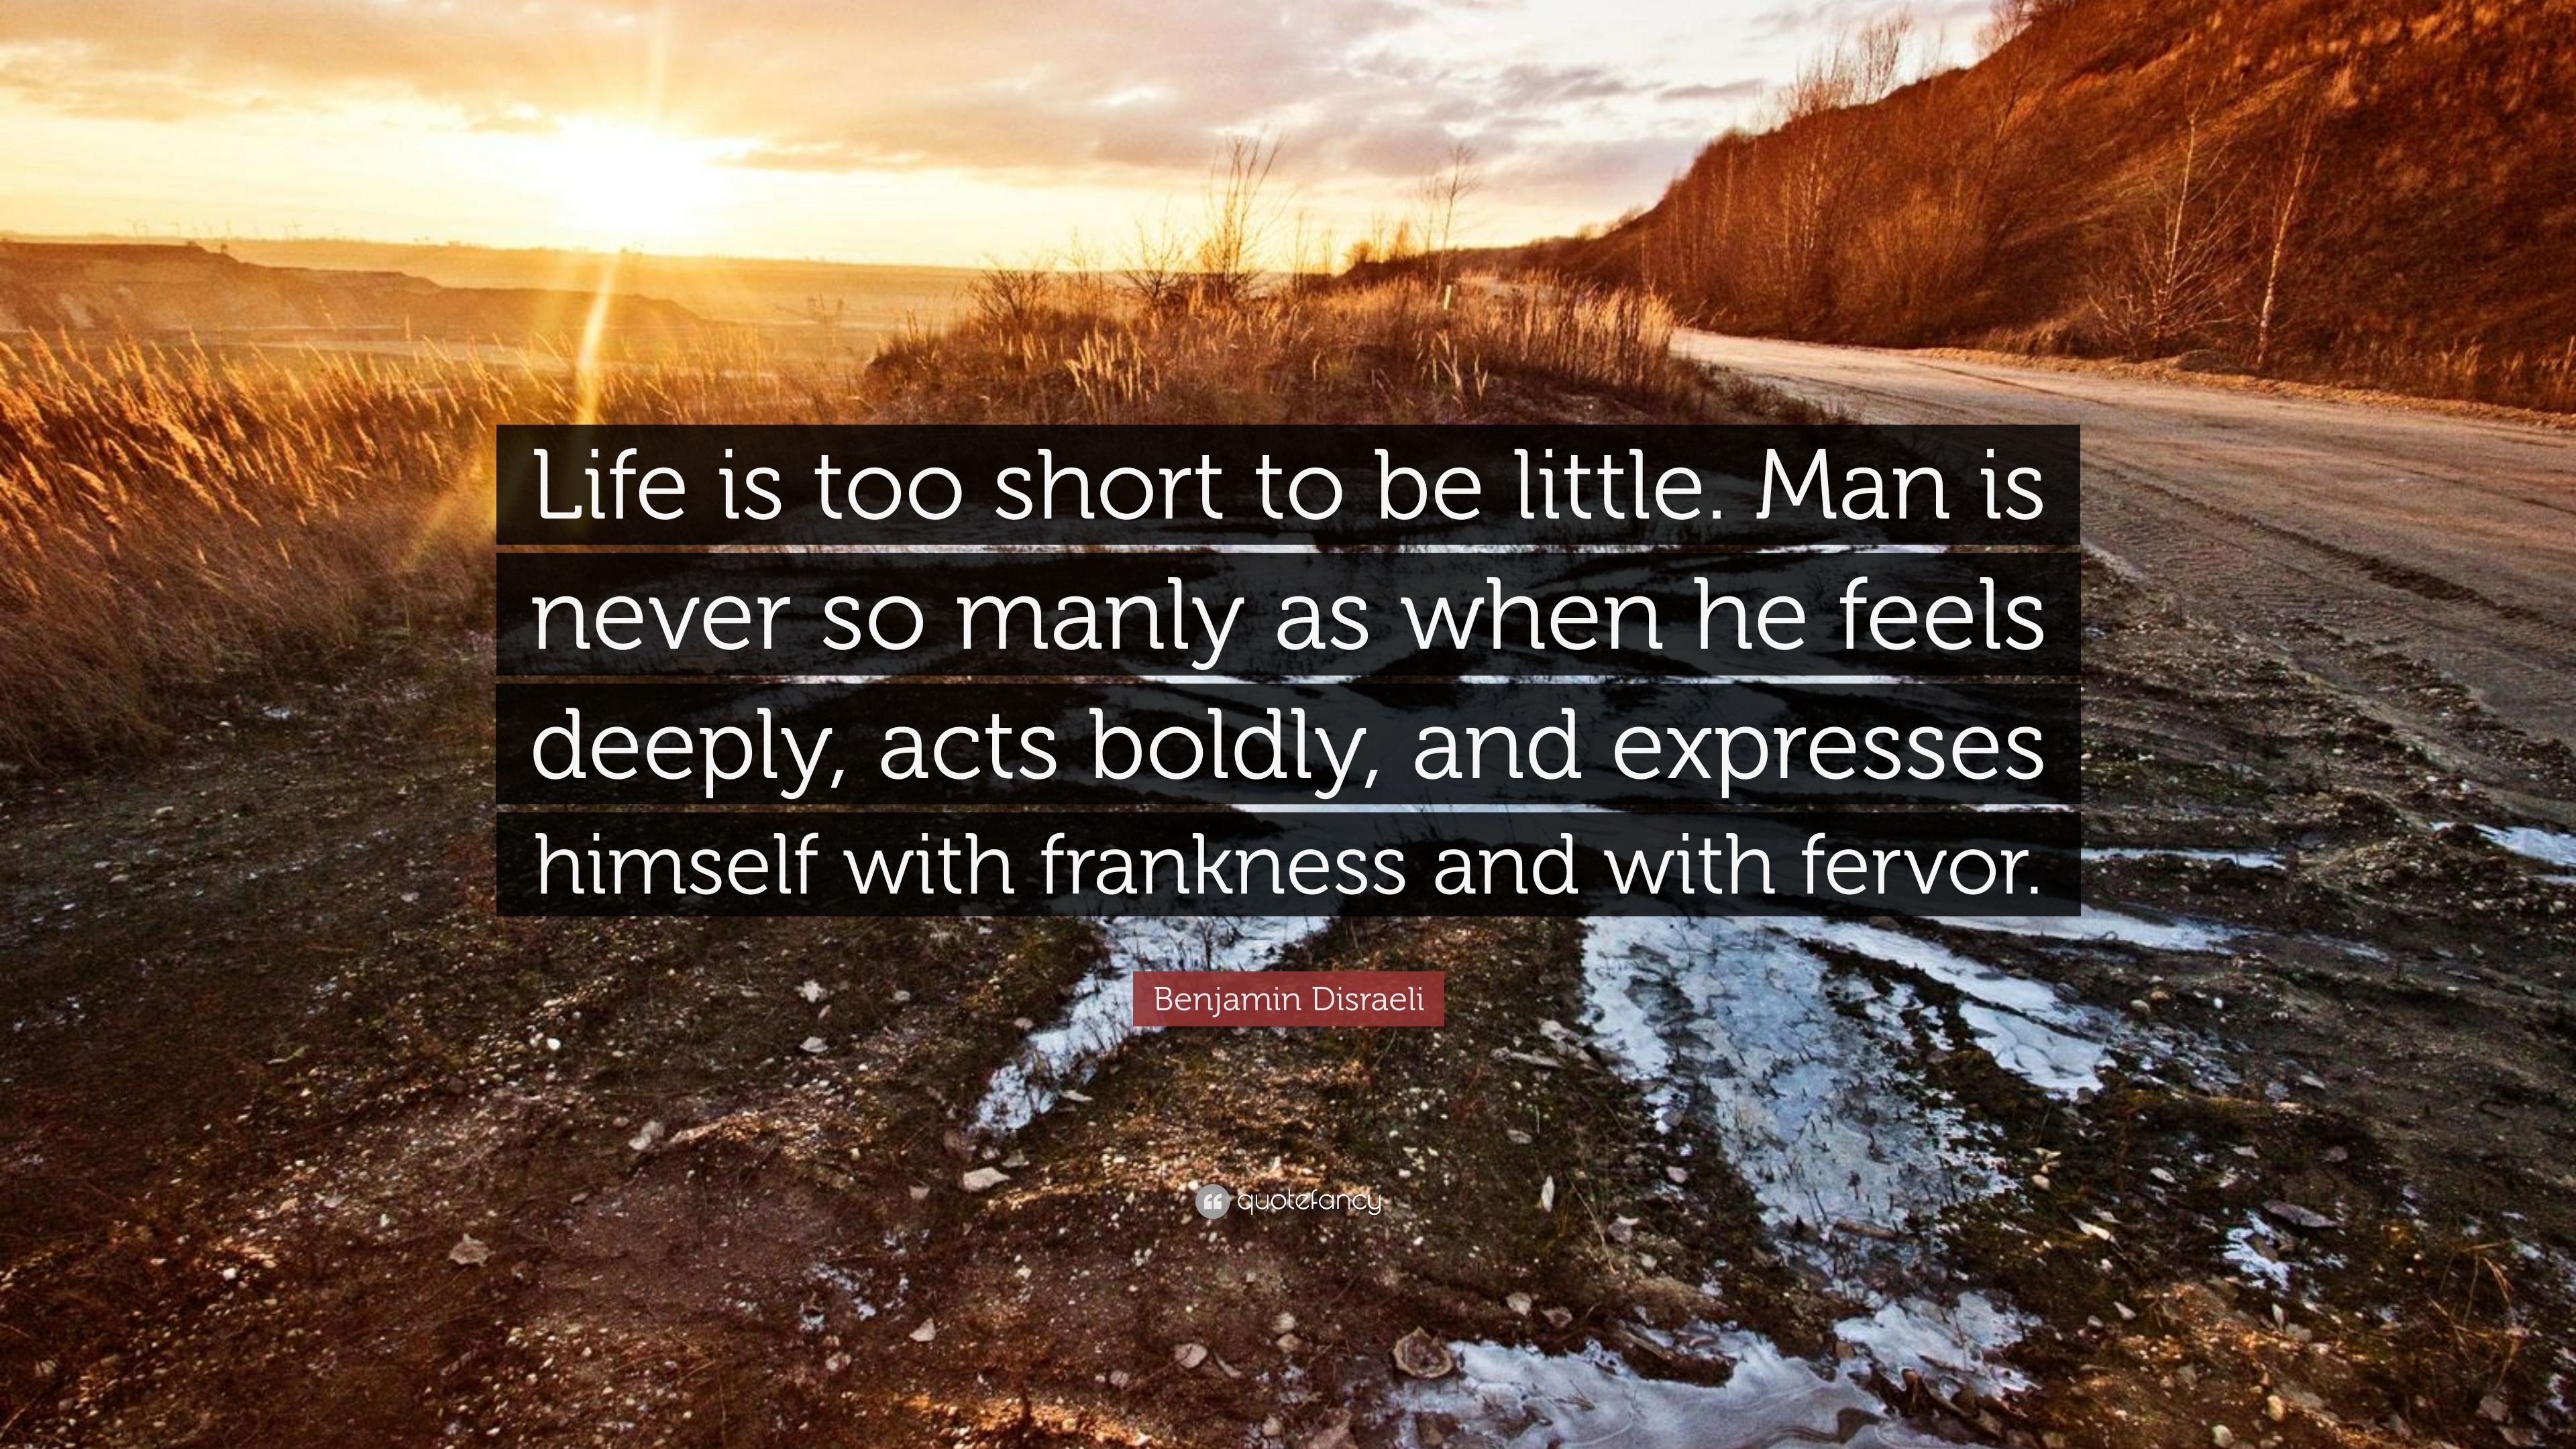 Benjamin Disraeli Quote “life Is Too Short To Be Little Man Is Never So Manly As When He Feels